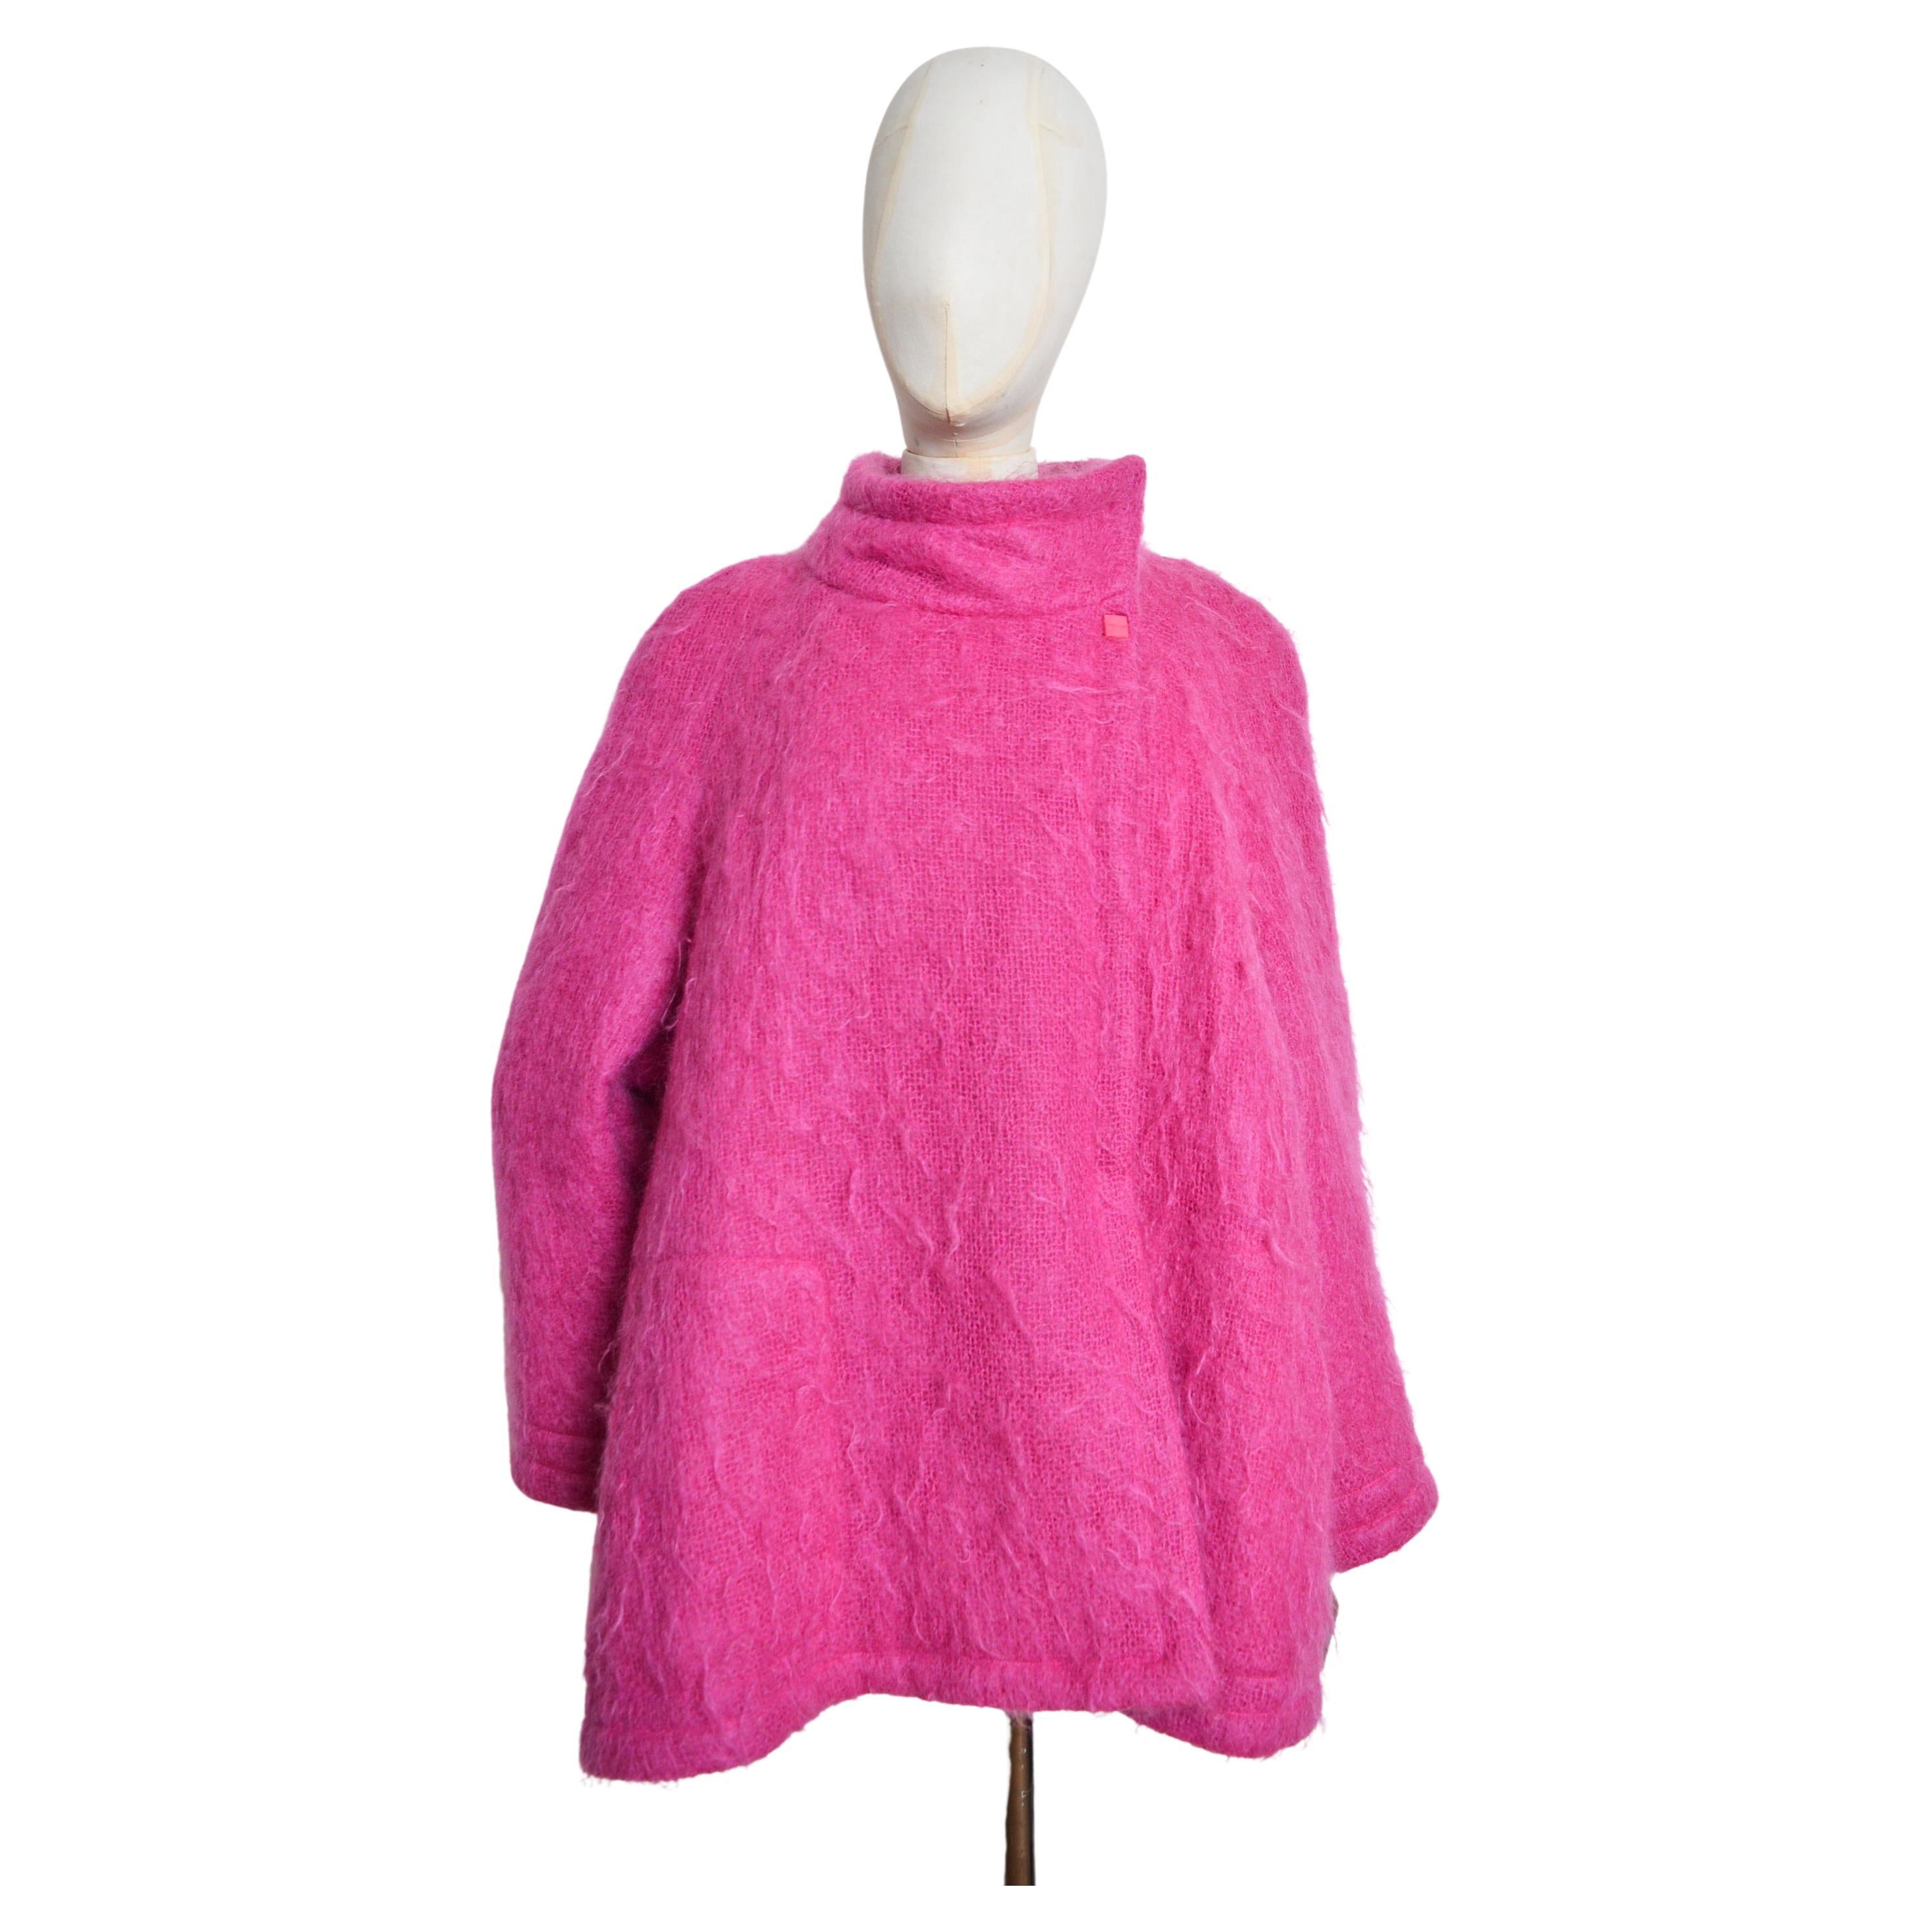 Beautiful Vintage Thierry Mugler, wool swing coat made from soft fuzzy 'hot pink' coloured mohair, circa 1980. 

This beautiful swing coat features an oversized fit with an asymmetric collar button fasten, smooth hot pink satin interior lining and